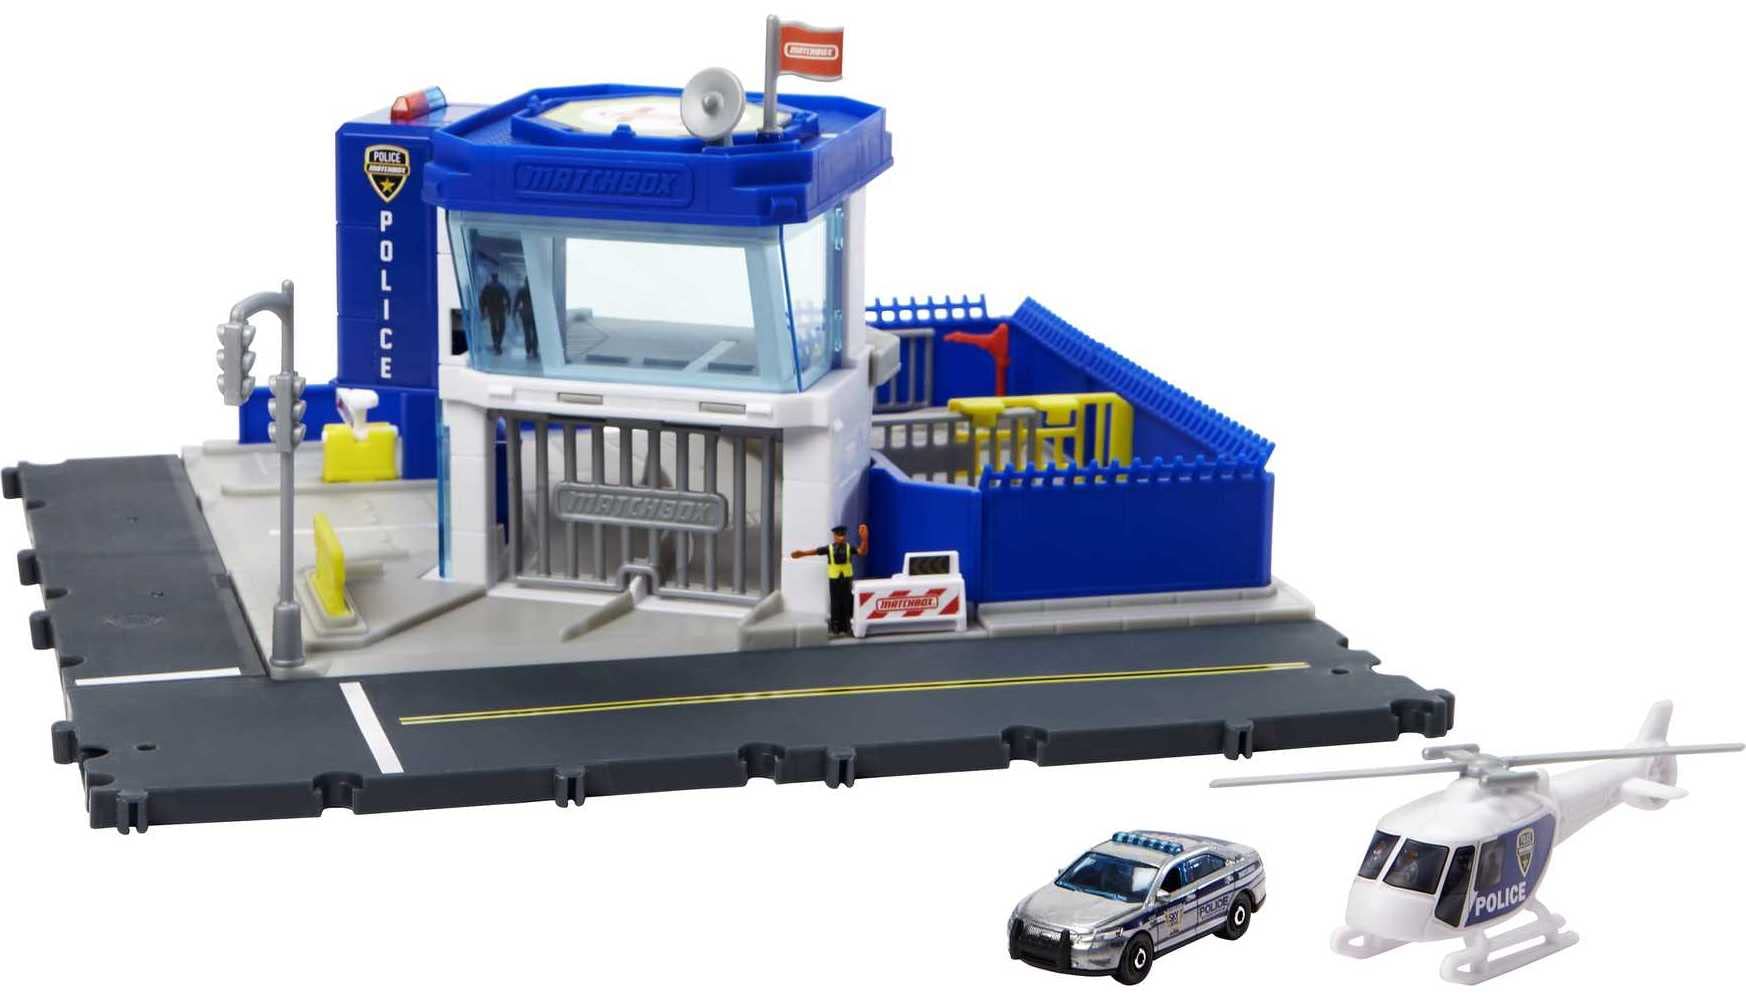 Matchbox Action Drivers Police Station Dispatch Playset with 1 Helicopter & 1 Ford Police Car, w/ Lights & Sounds $9.00 + Free Shipping w/ Prime or on $25+